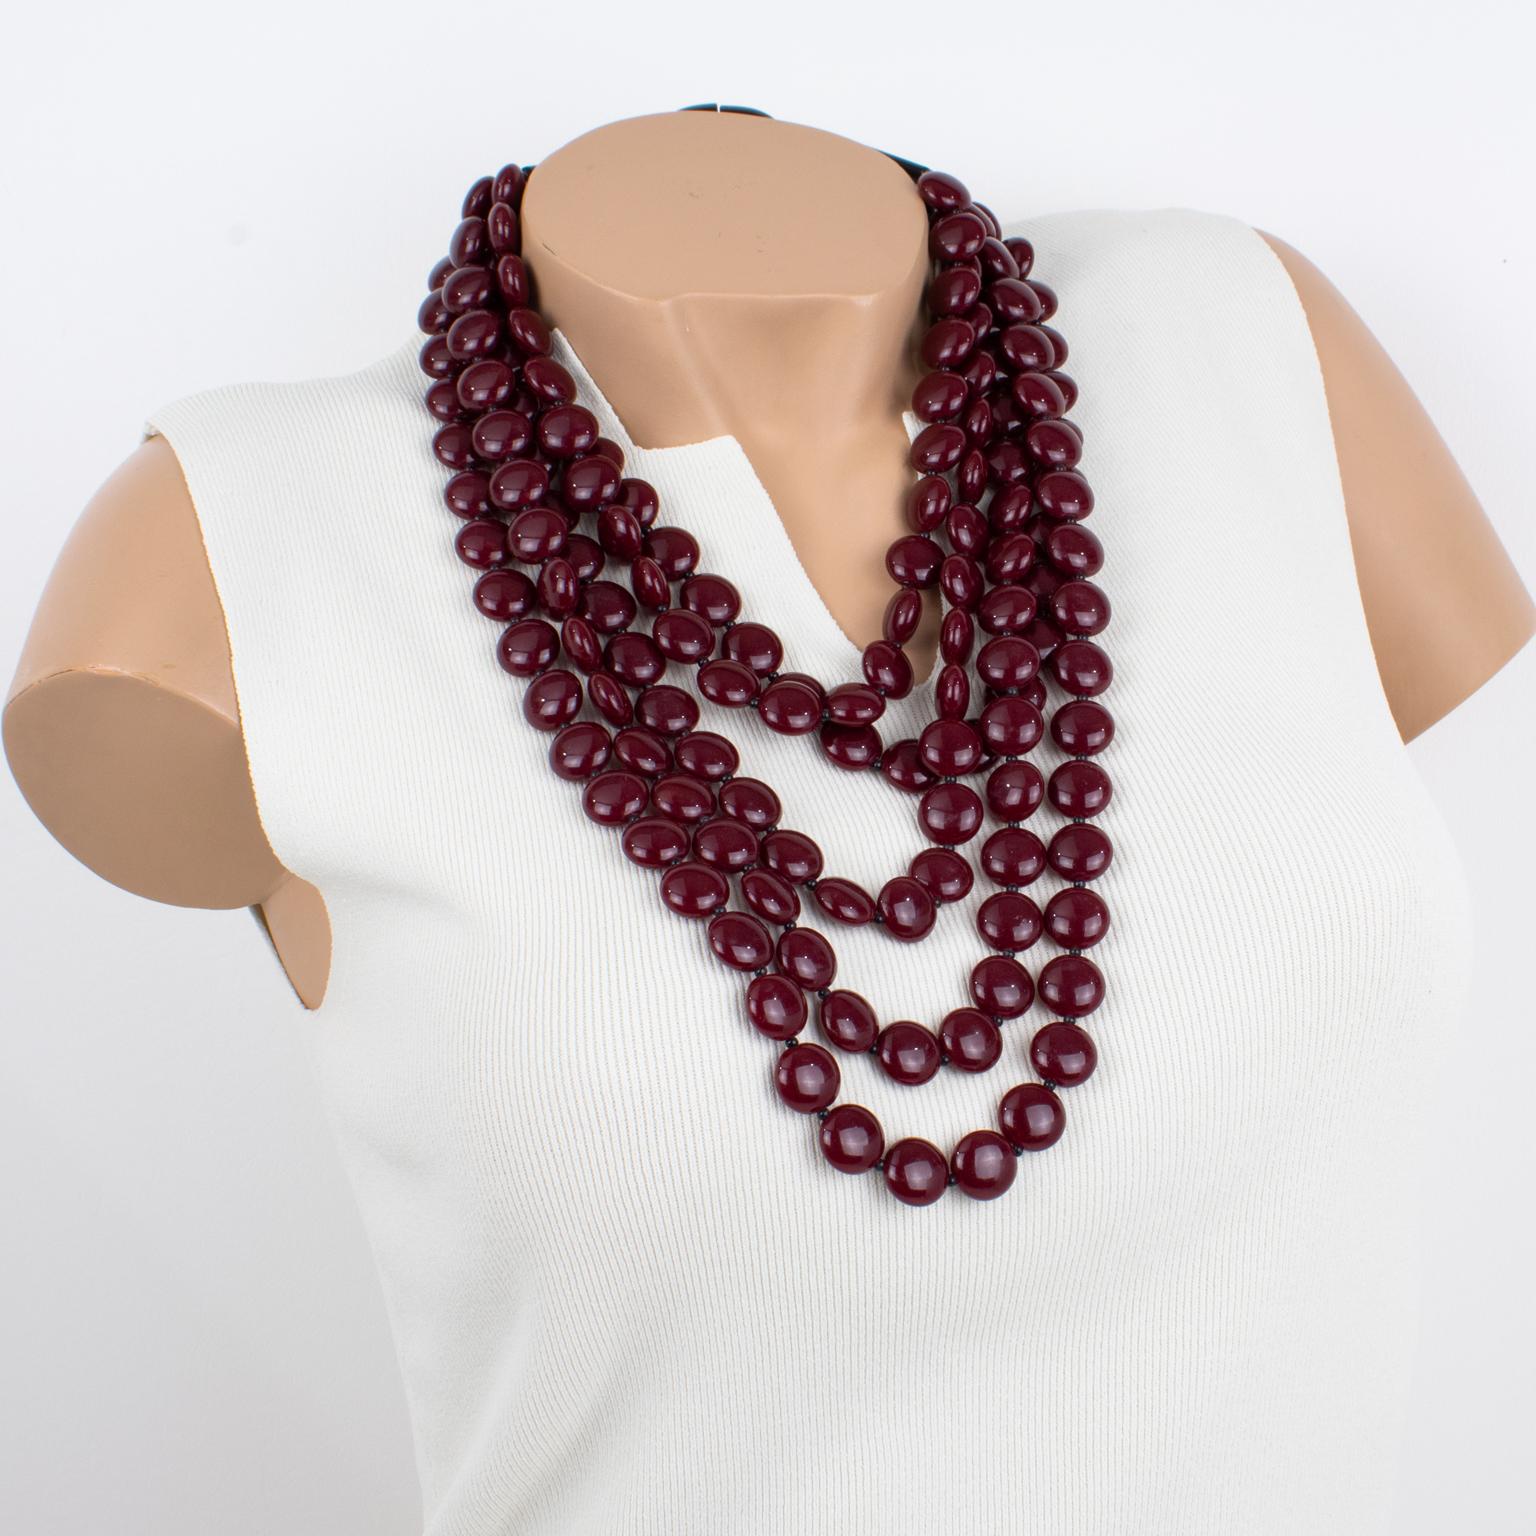 This superb Angela Caputi, made-in-Italy resin choker necklace features an oversized multi-strand design with lovely red Bordeaux and black colors. The geometric flat and slightly domed rounded pebbles (they look like Smarties) are built in five